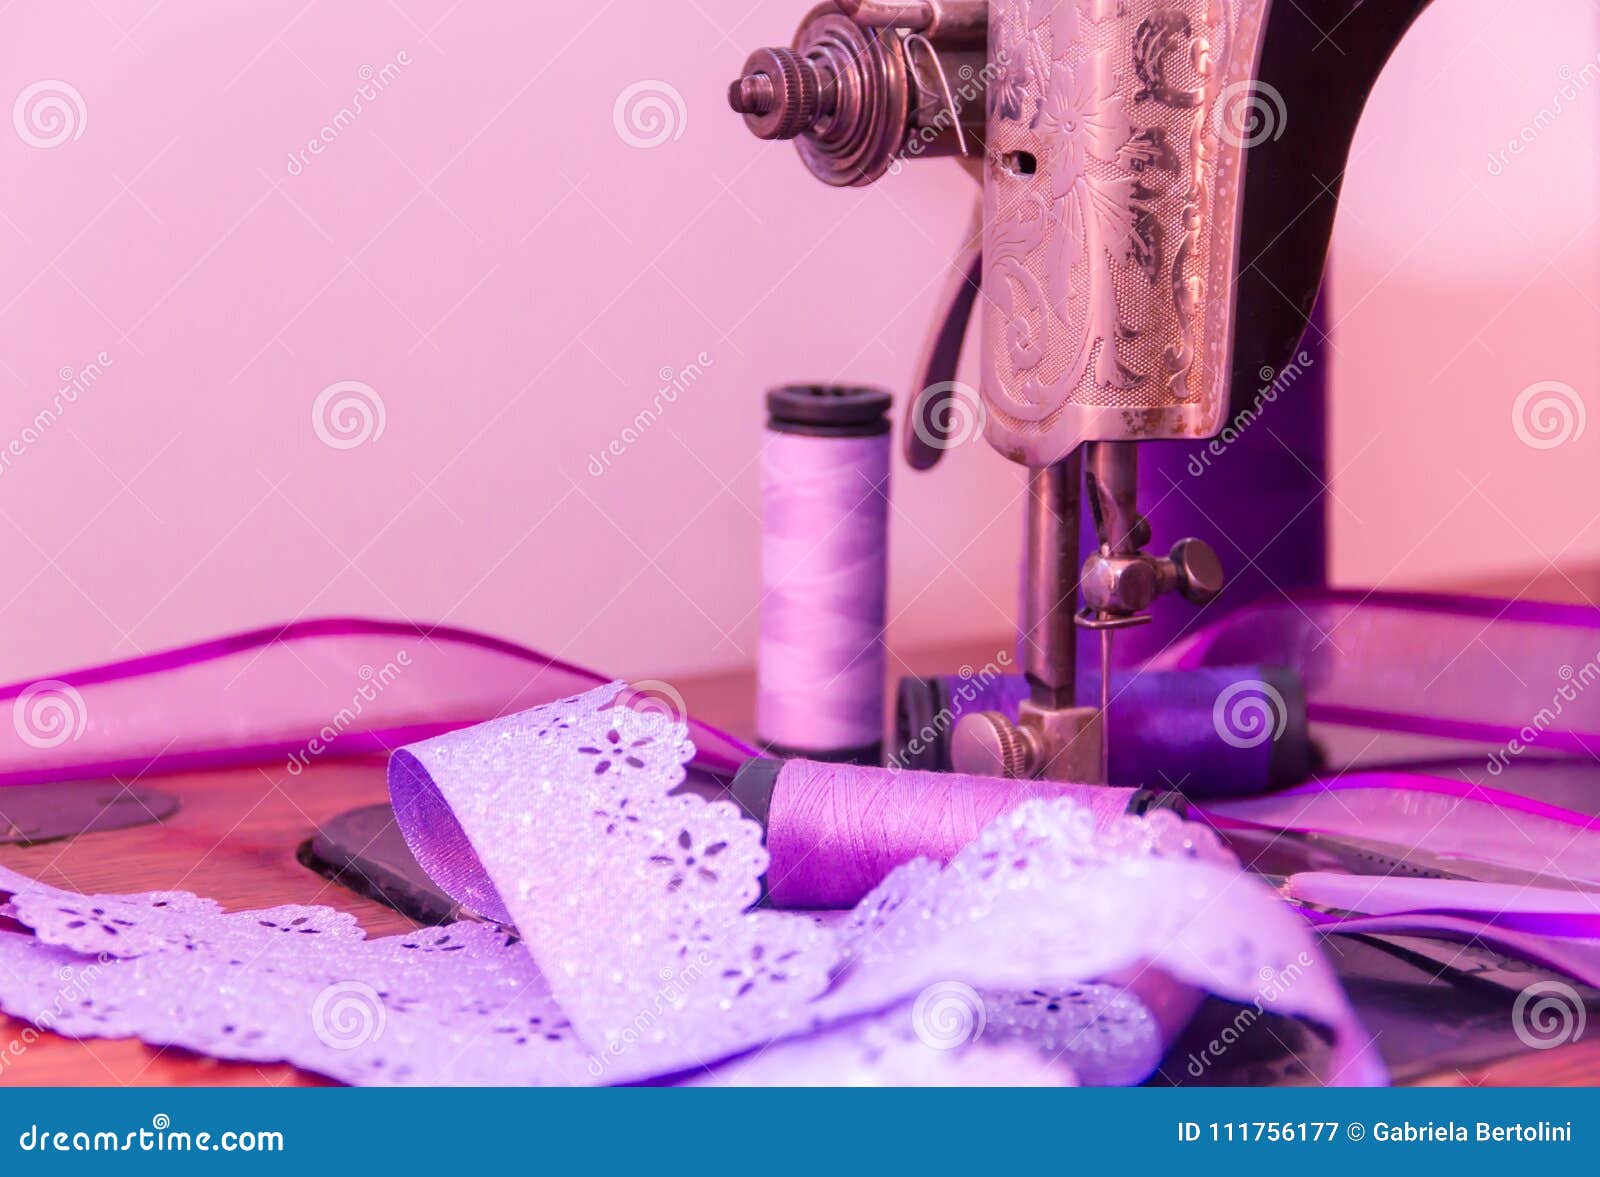 old sewing machine and sewing s